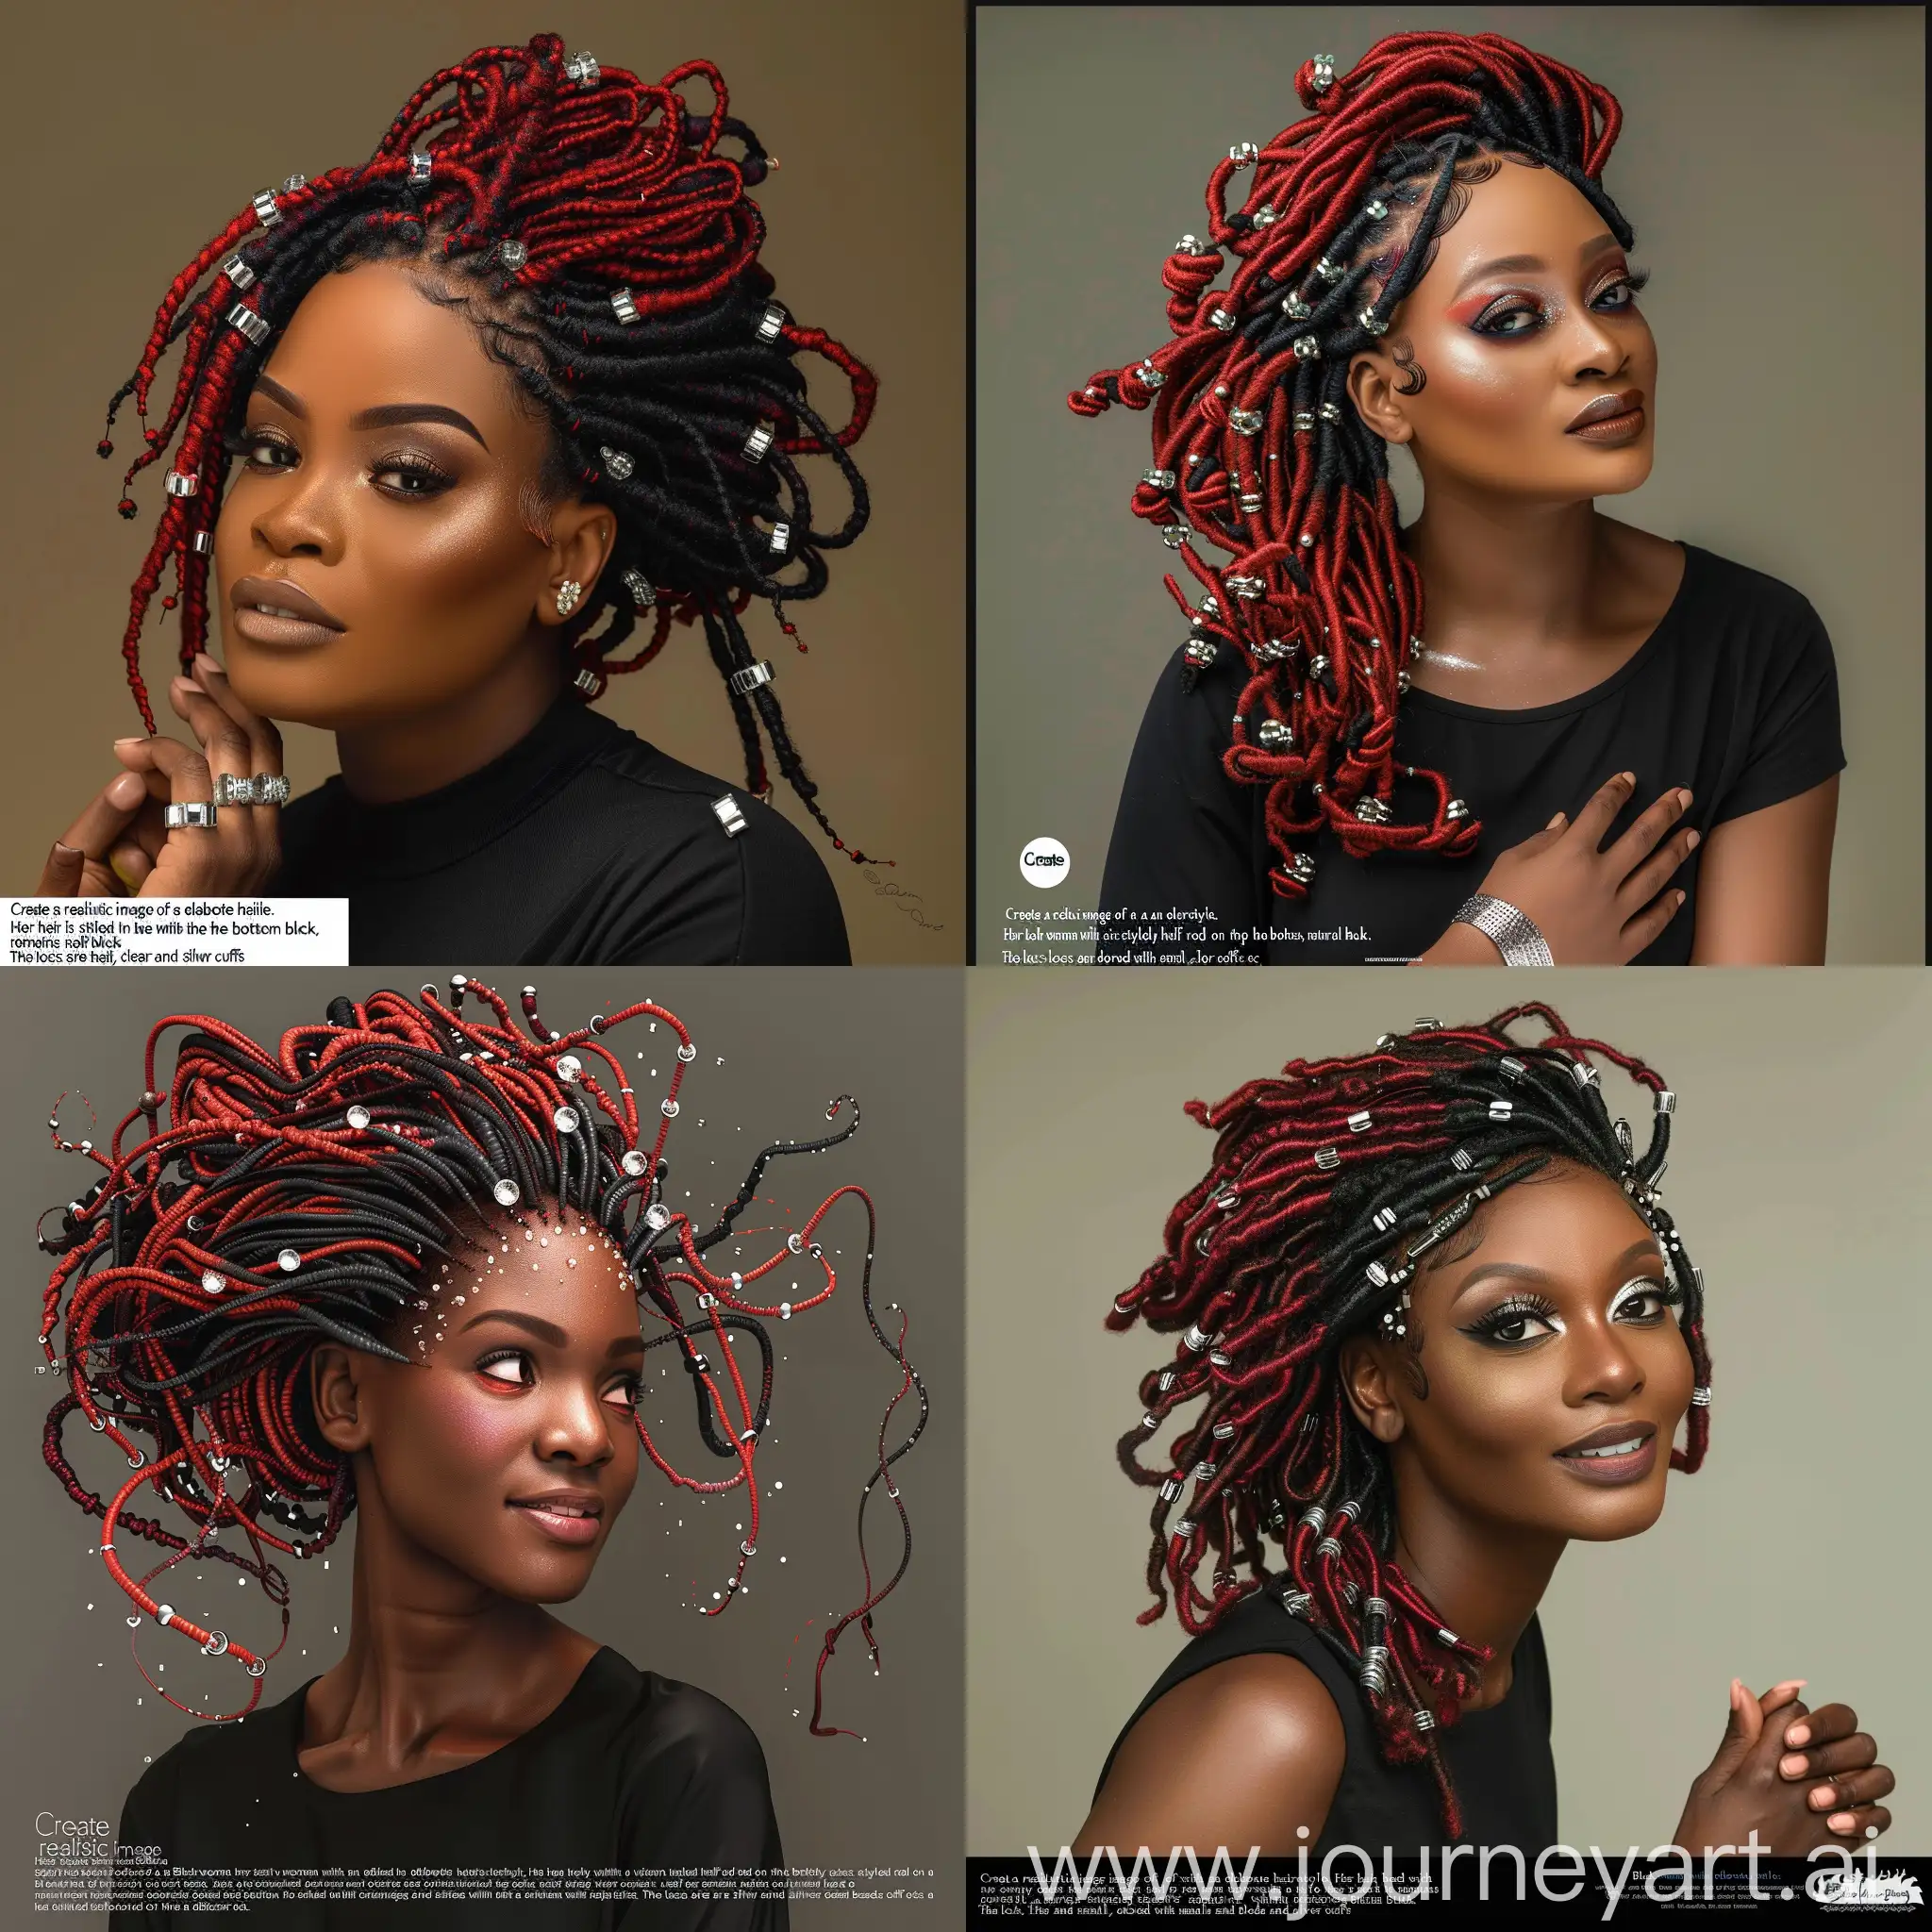 “Create a realistic image of a Black woman with an elaborate hairstyle. Her hair is styled in locs, richly hued with a vibrant red on the top half while the bottom half remains natural black. The locs are adorned with small, clear beads and silver cuffs scattered throughout, adding an elegant touch. Her locs are partly cascading down her shoulders and back, with some locs playfully framing her face. She has a serene expression with a soft, confident smile. Her makeup is sophisticated with a neutral palette, highlighting her eyes and a subtle lip color. She wears a black shirt and poses with her hands gently clasping together. Please ensure the background is a solid, muted shade to not distract from the detail of the hairstyle.”